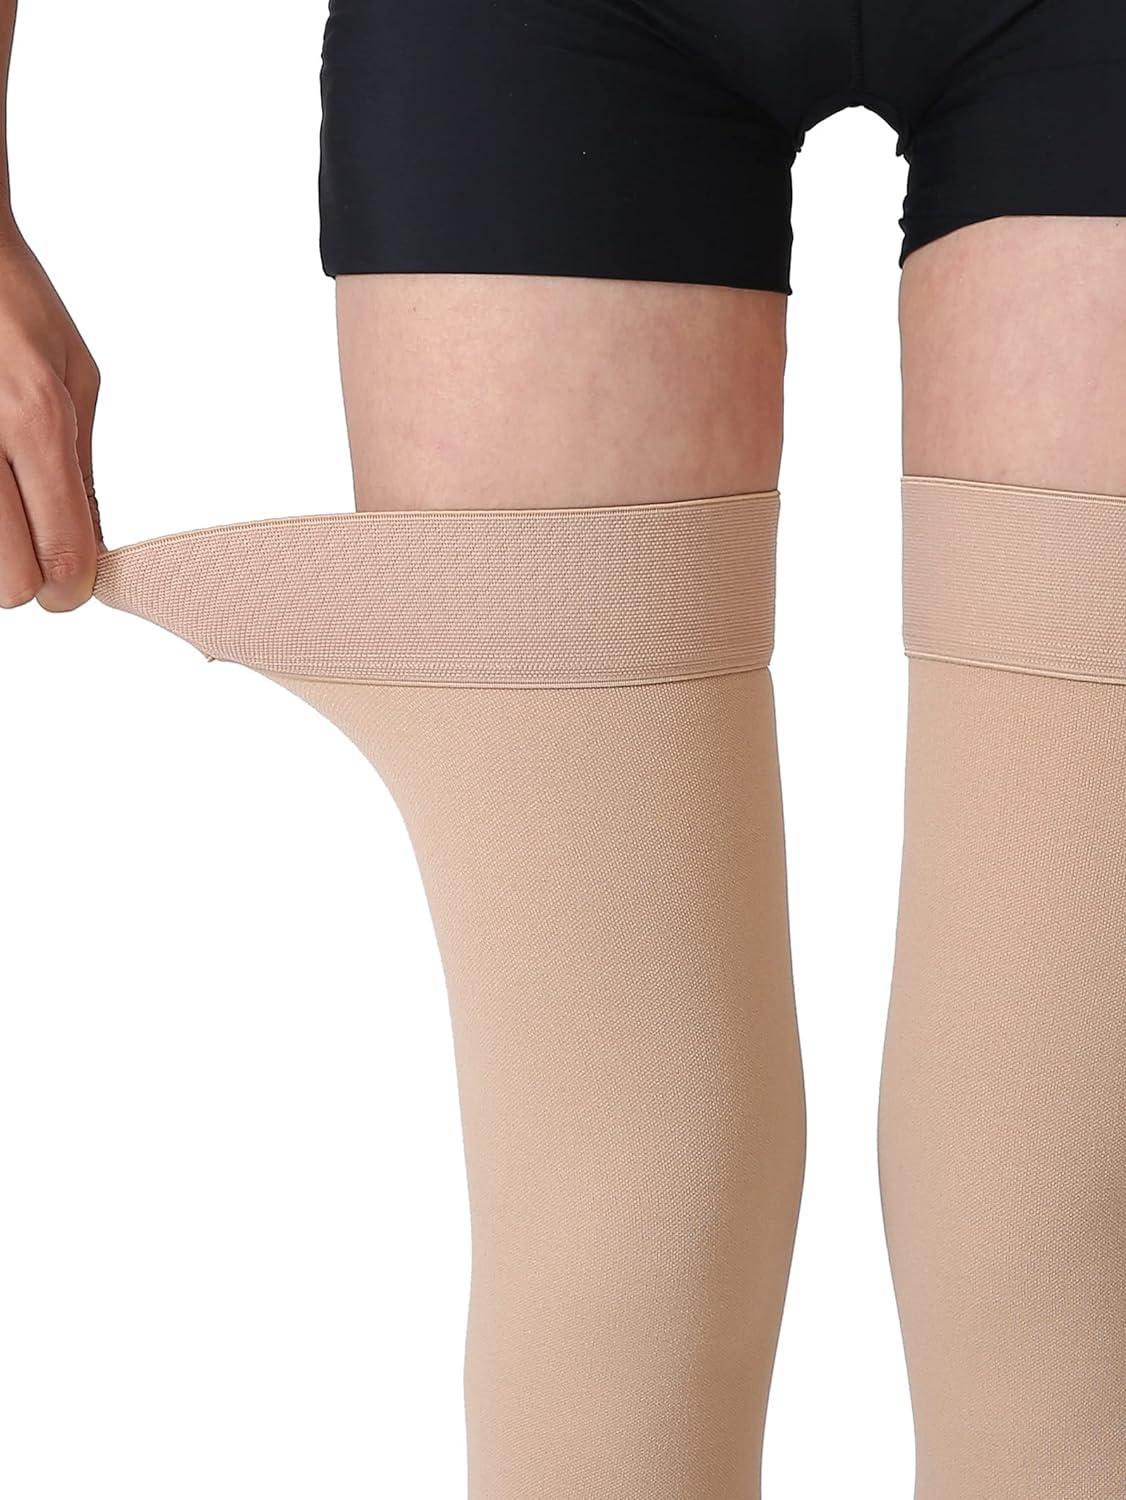 Thigh High Compression Stockings Closed Toe Pair Firm Support 20